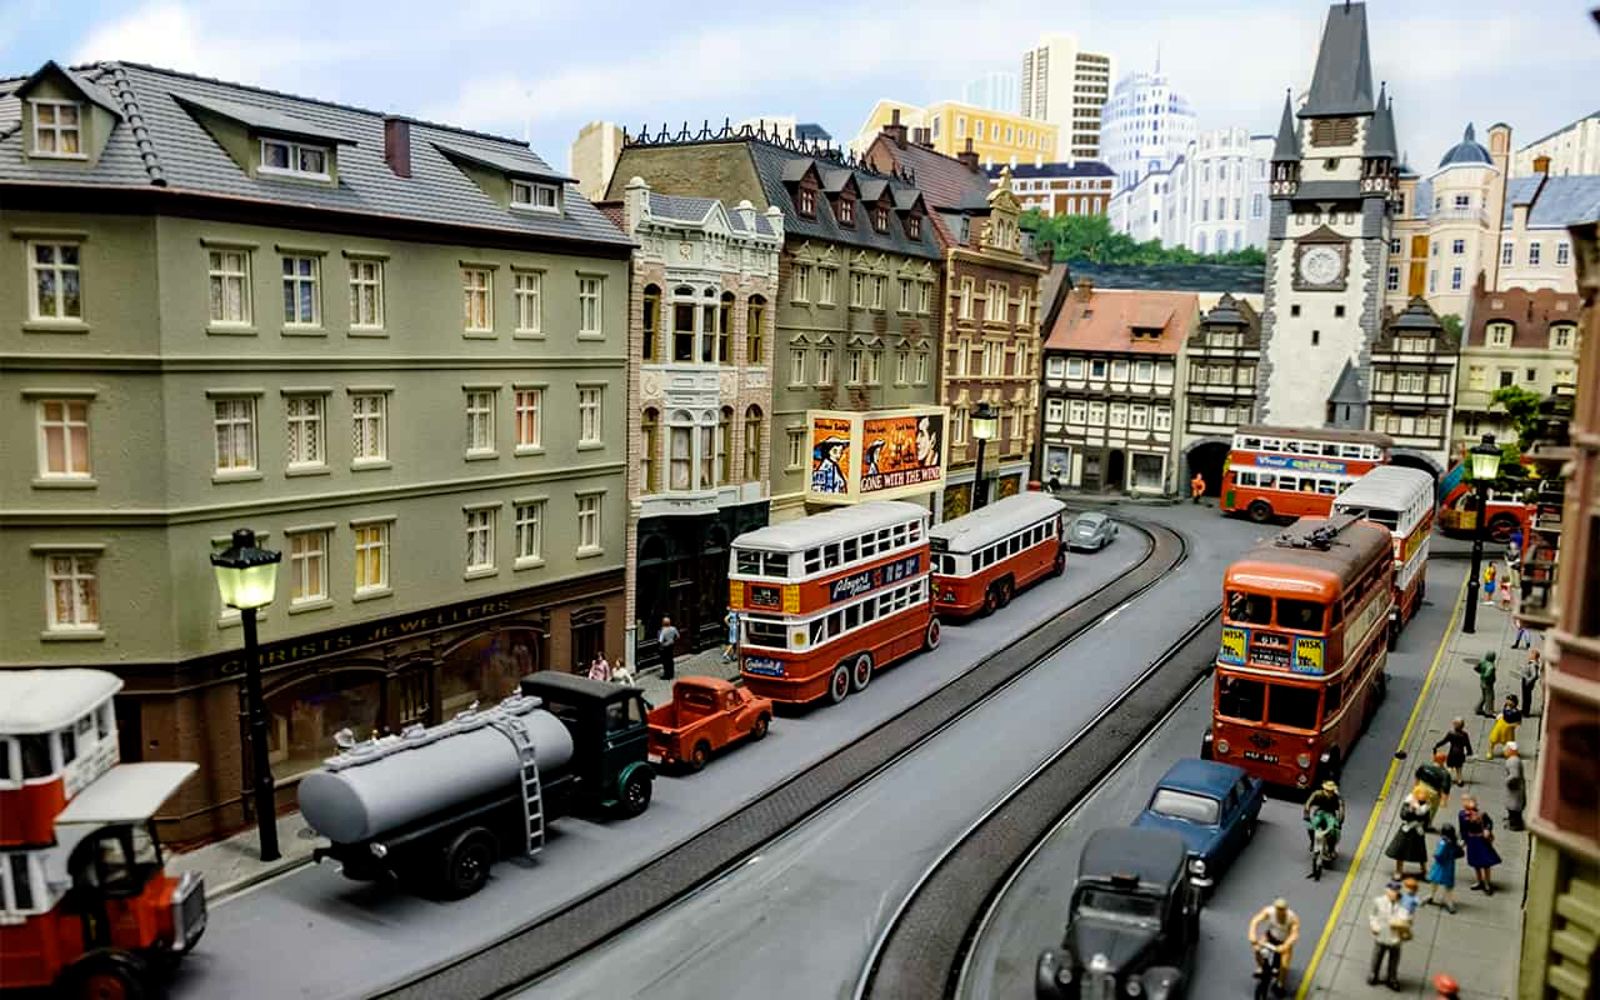 miniature world, one of the best things to do in victoria for families.